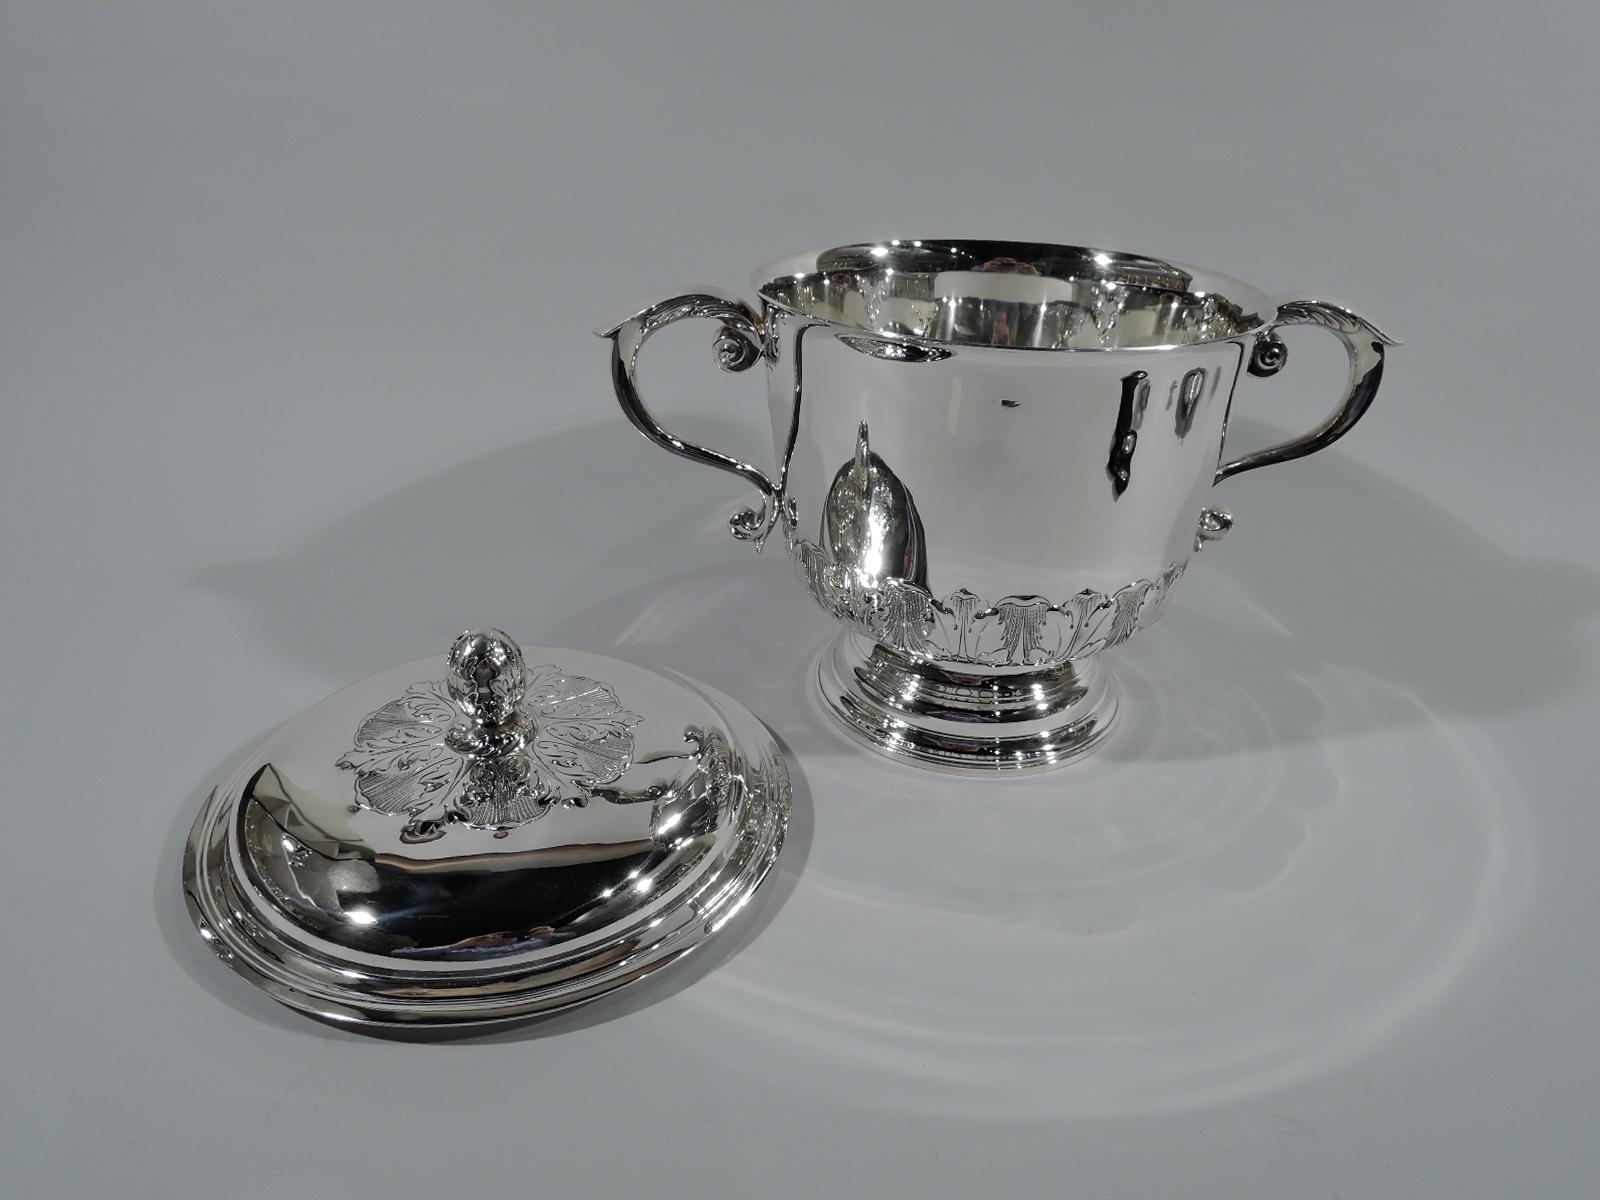 Georgian style sterling silver covered trophy cup. Retailed by Peter Guille, Ltd in New York. Urn with leaf-capped s-scroll side handles and stepped foot. Domed cover with leaf finial. Fluid leaf-and-dart border chased at base and surrounding